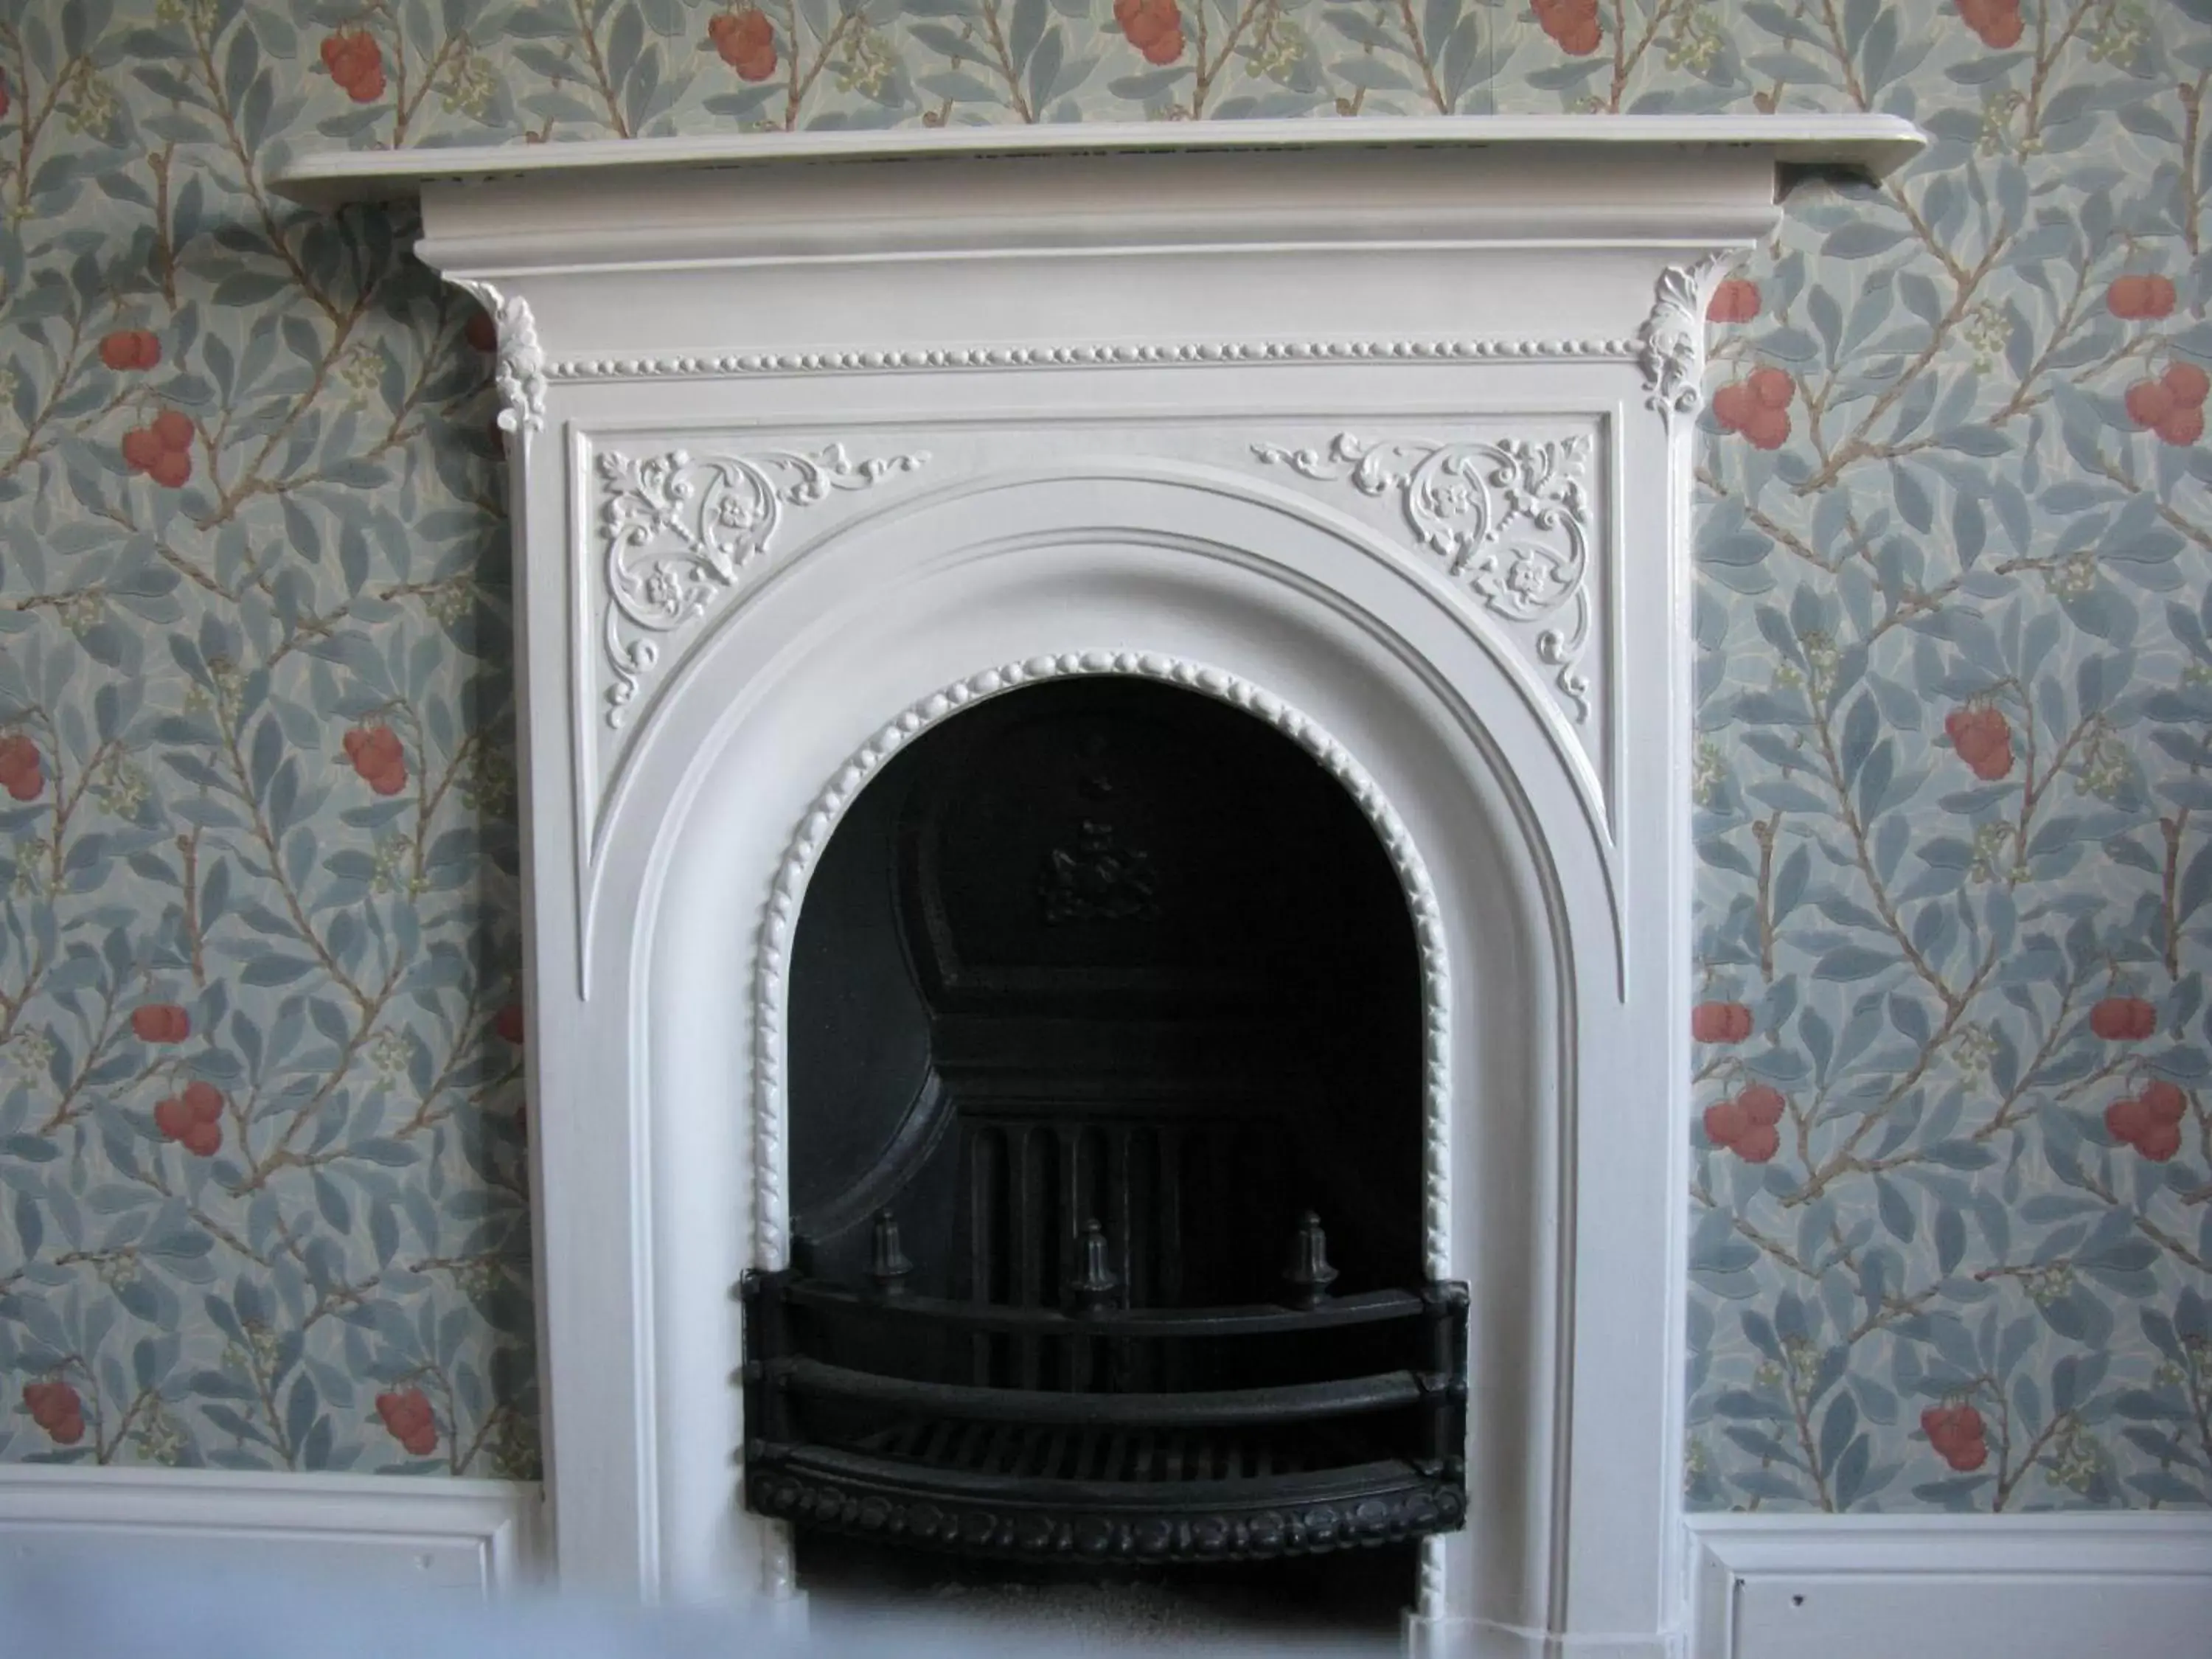 Decorative detail in The School House